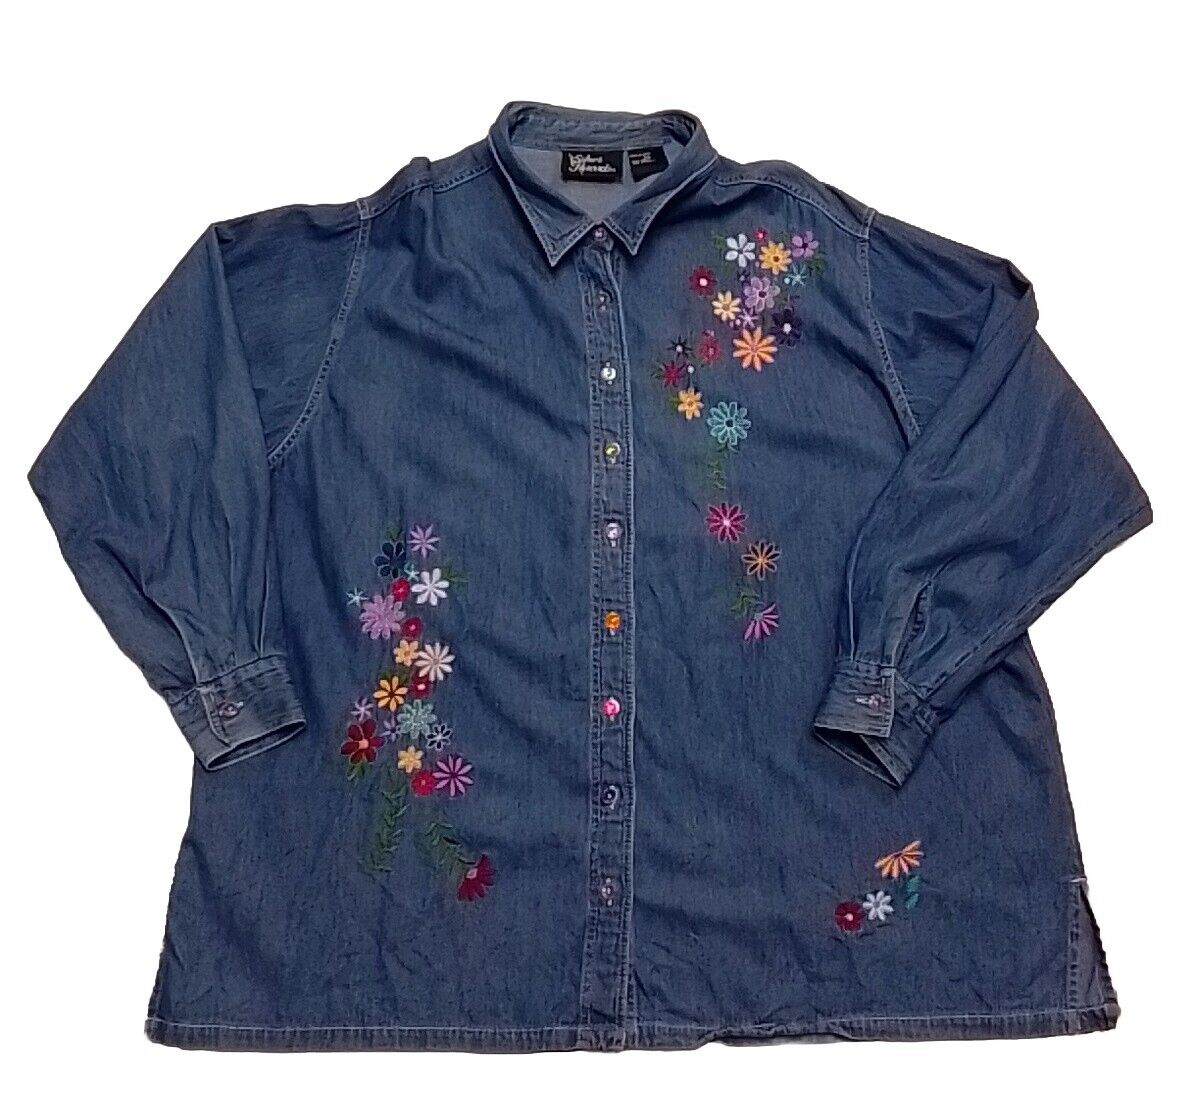 Silver Threads 3XL Denim Shirt Embroidered Embroidery Floral Flower